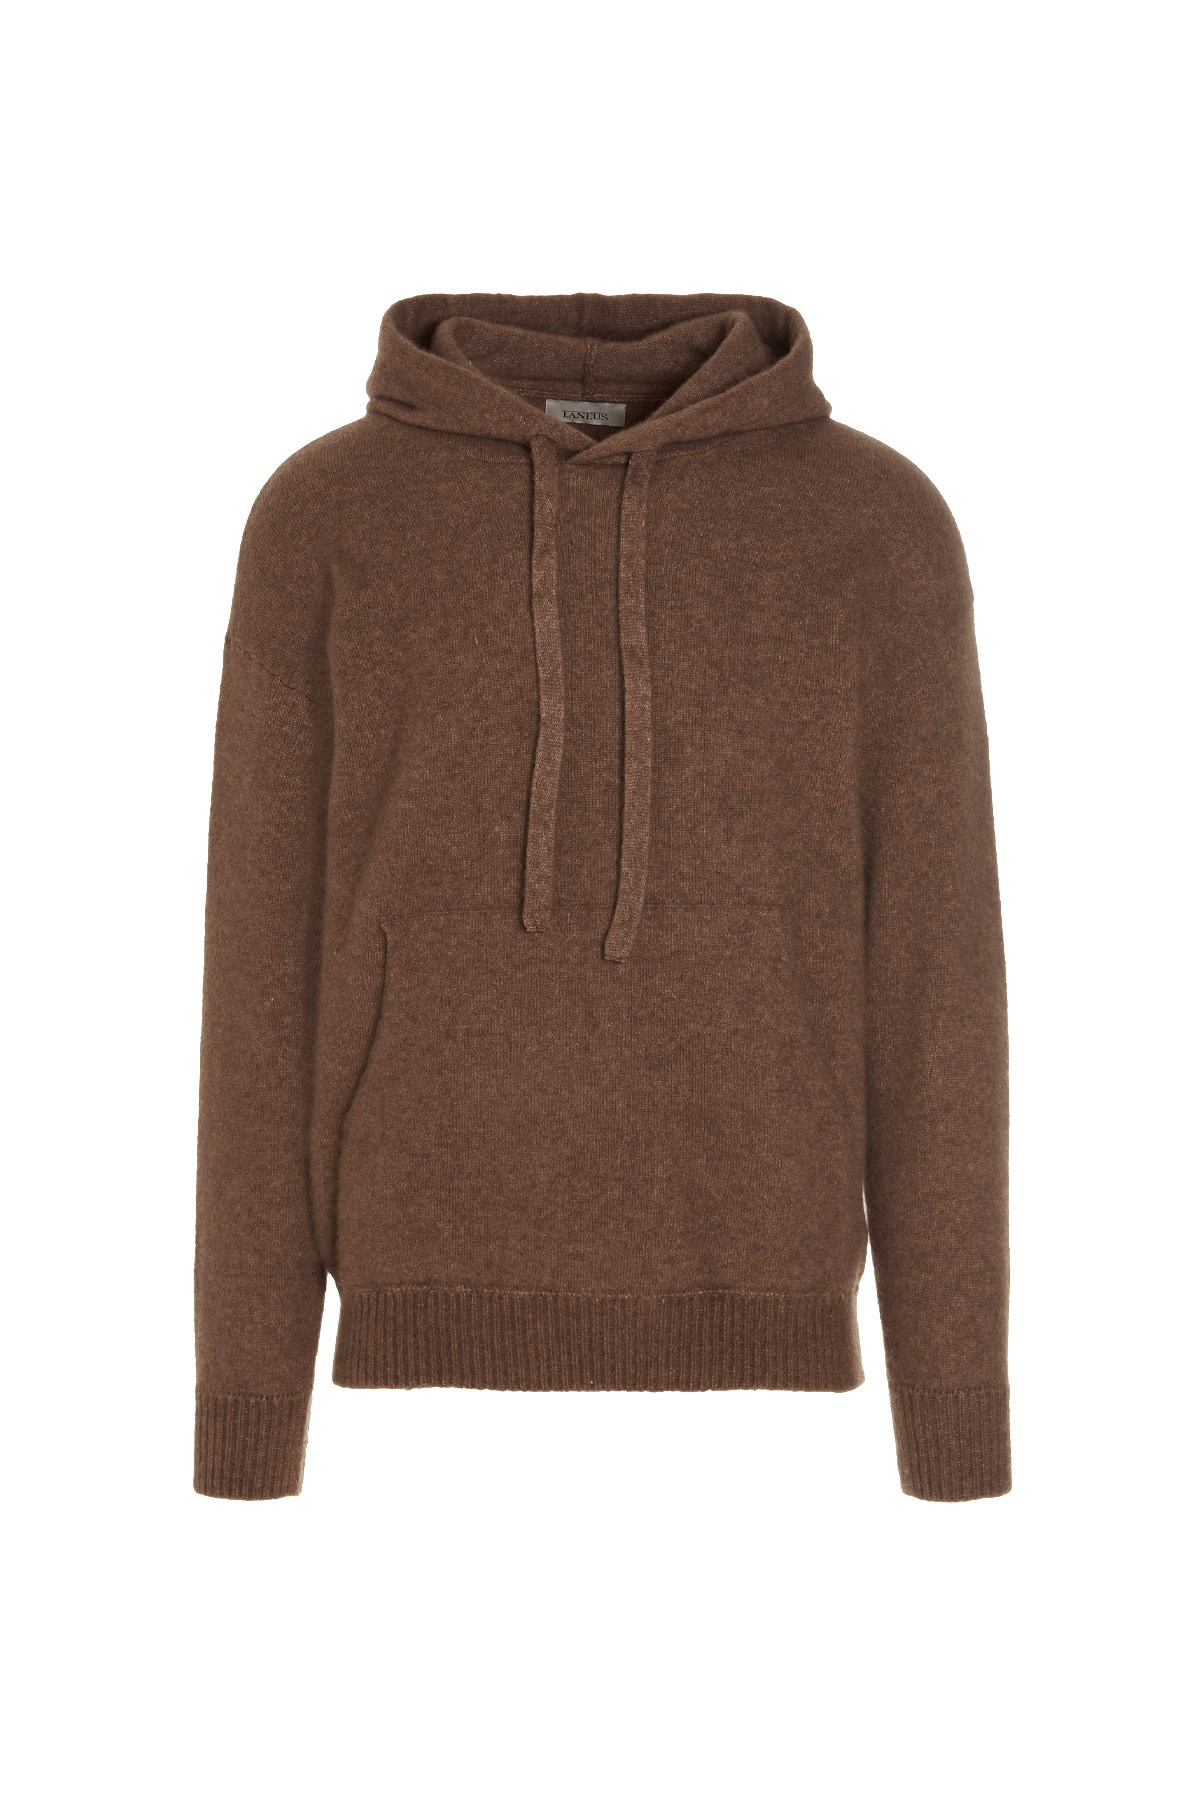 LANEUS Cashmere Hooded Sweater